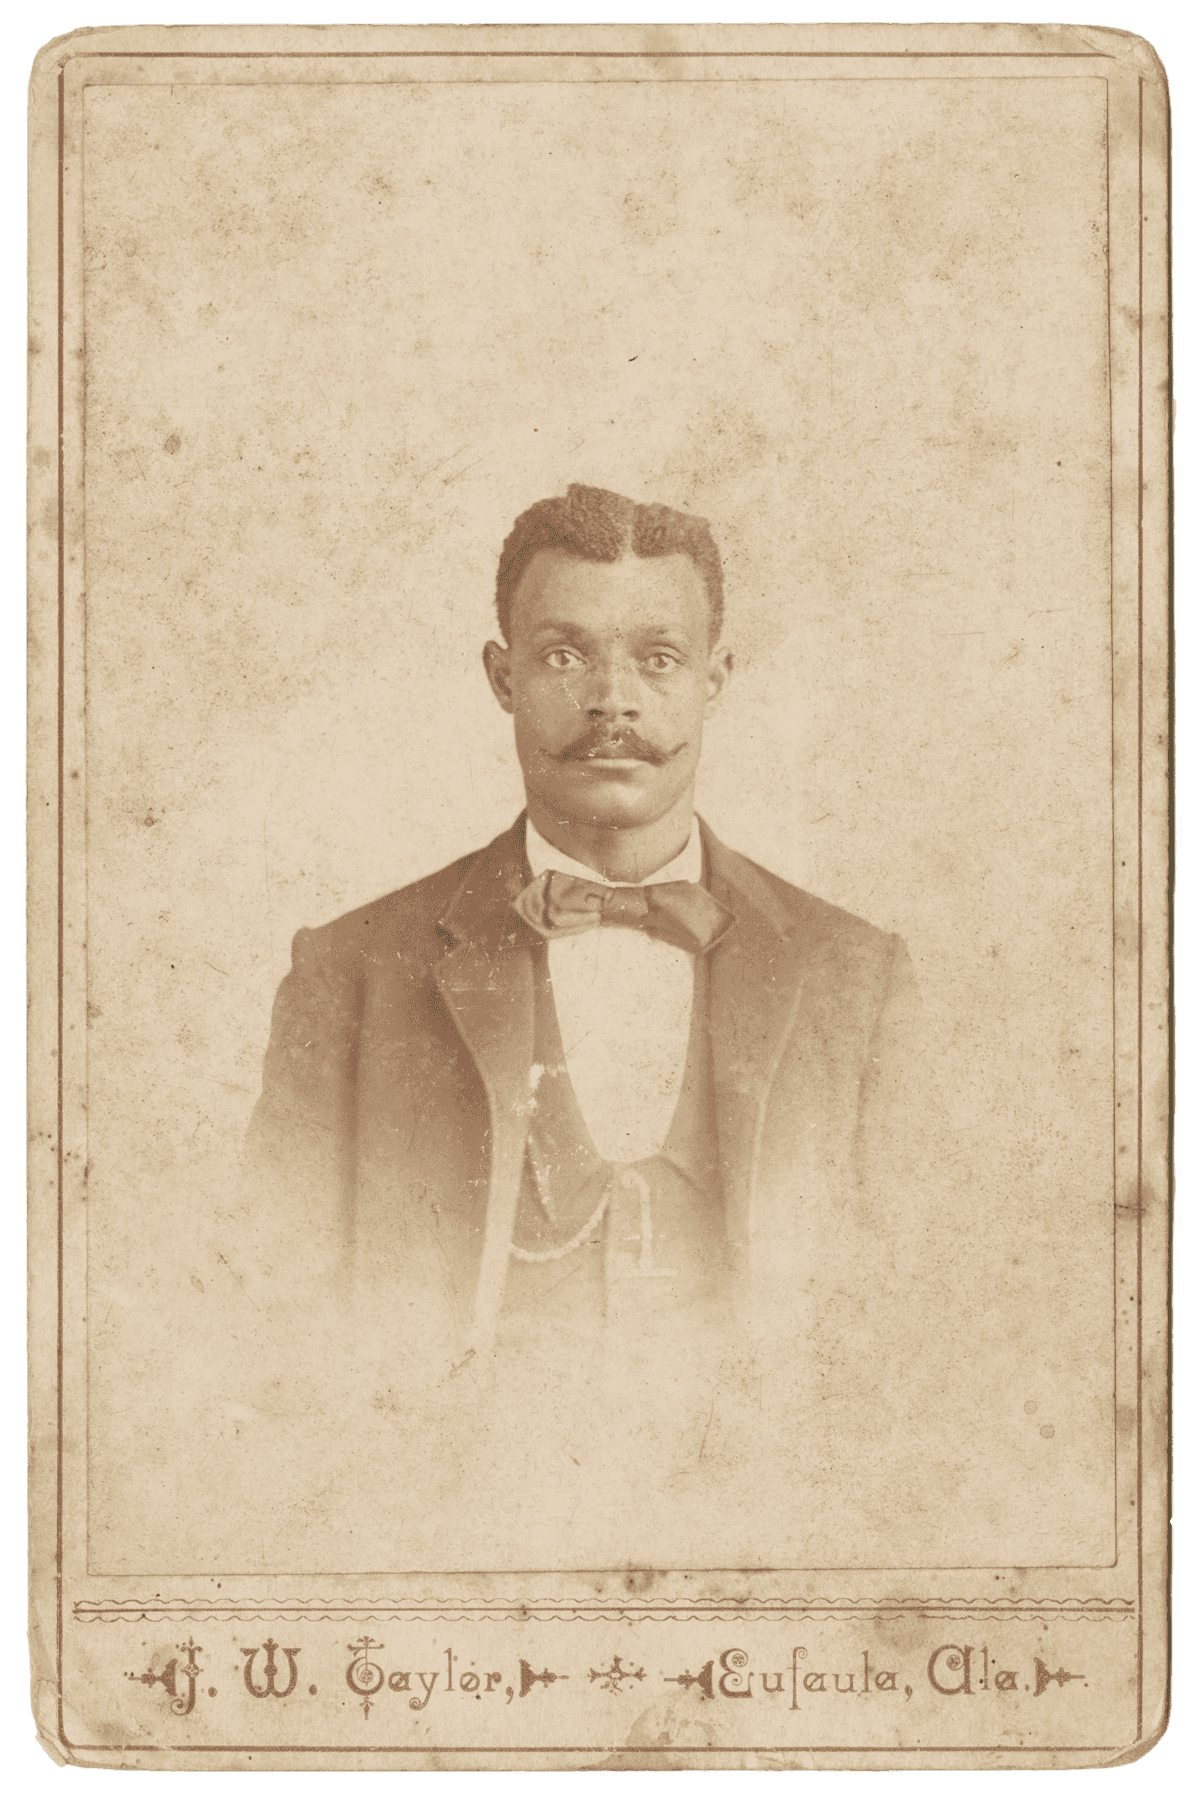 Black and white cabinet card of a man. Text on the card reads “J. W. Taylor, Eufaula, Ala.”